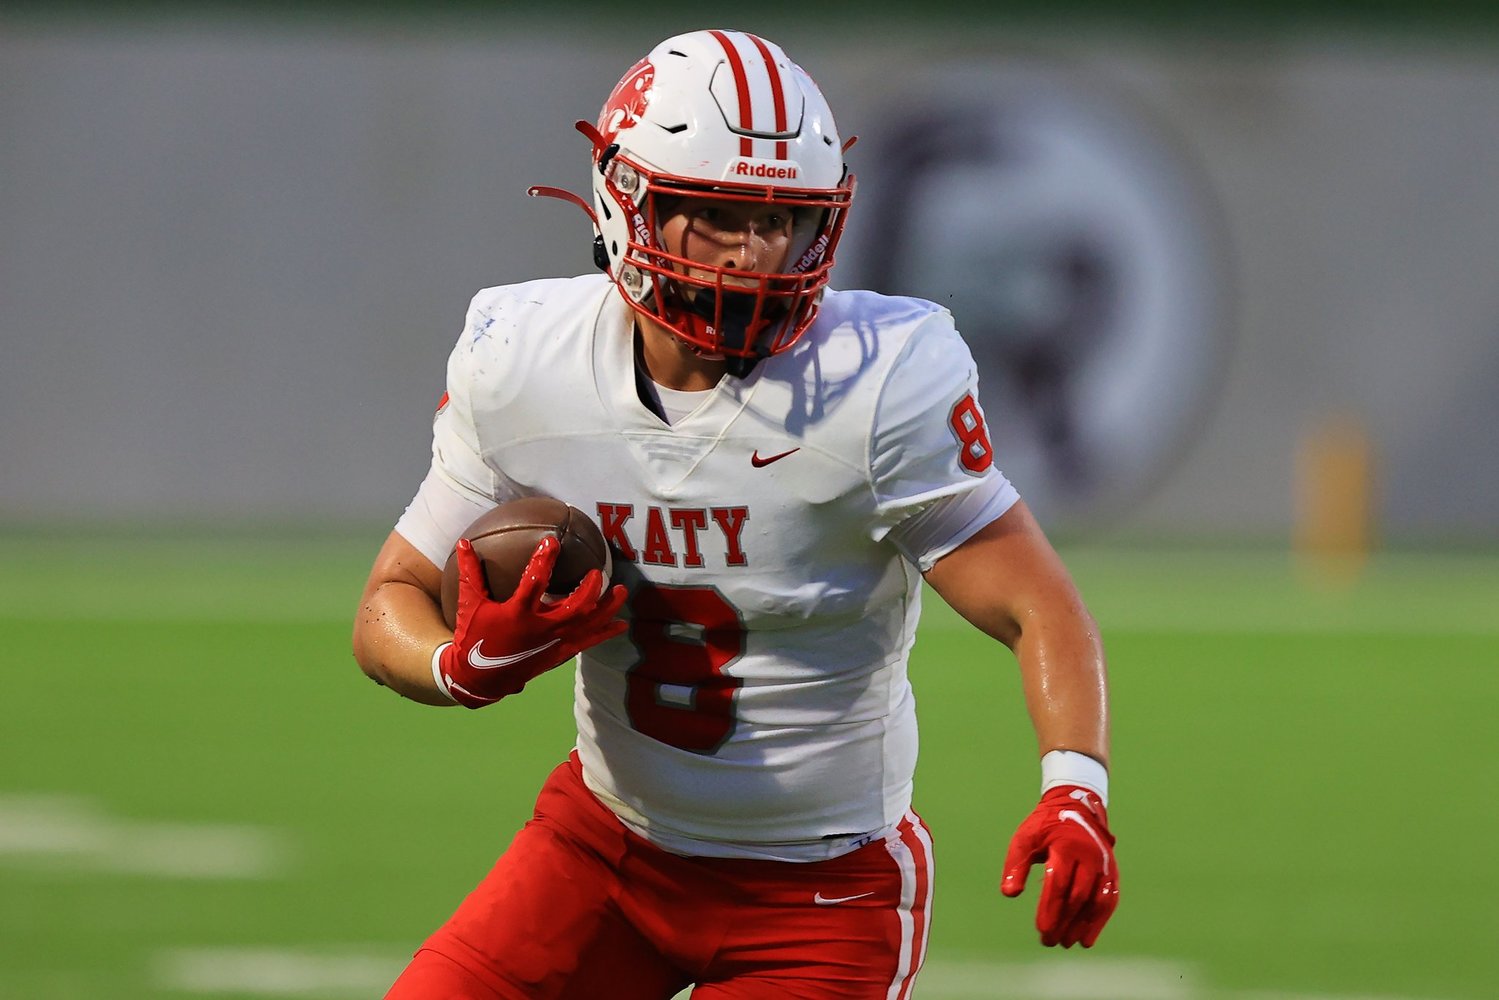 Katy’s Chase Johnsey catches a pass during Saturday’s game between Katy and Tompkins at Legacy Stadium.